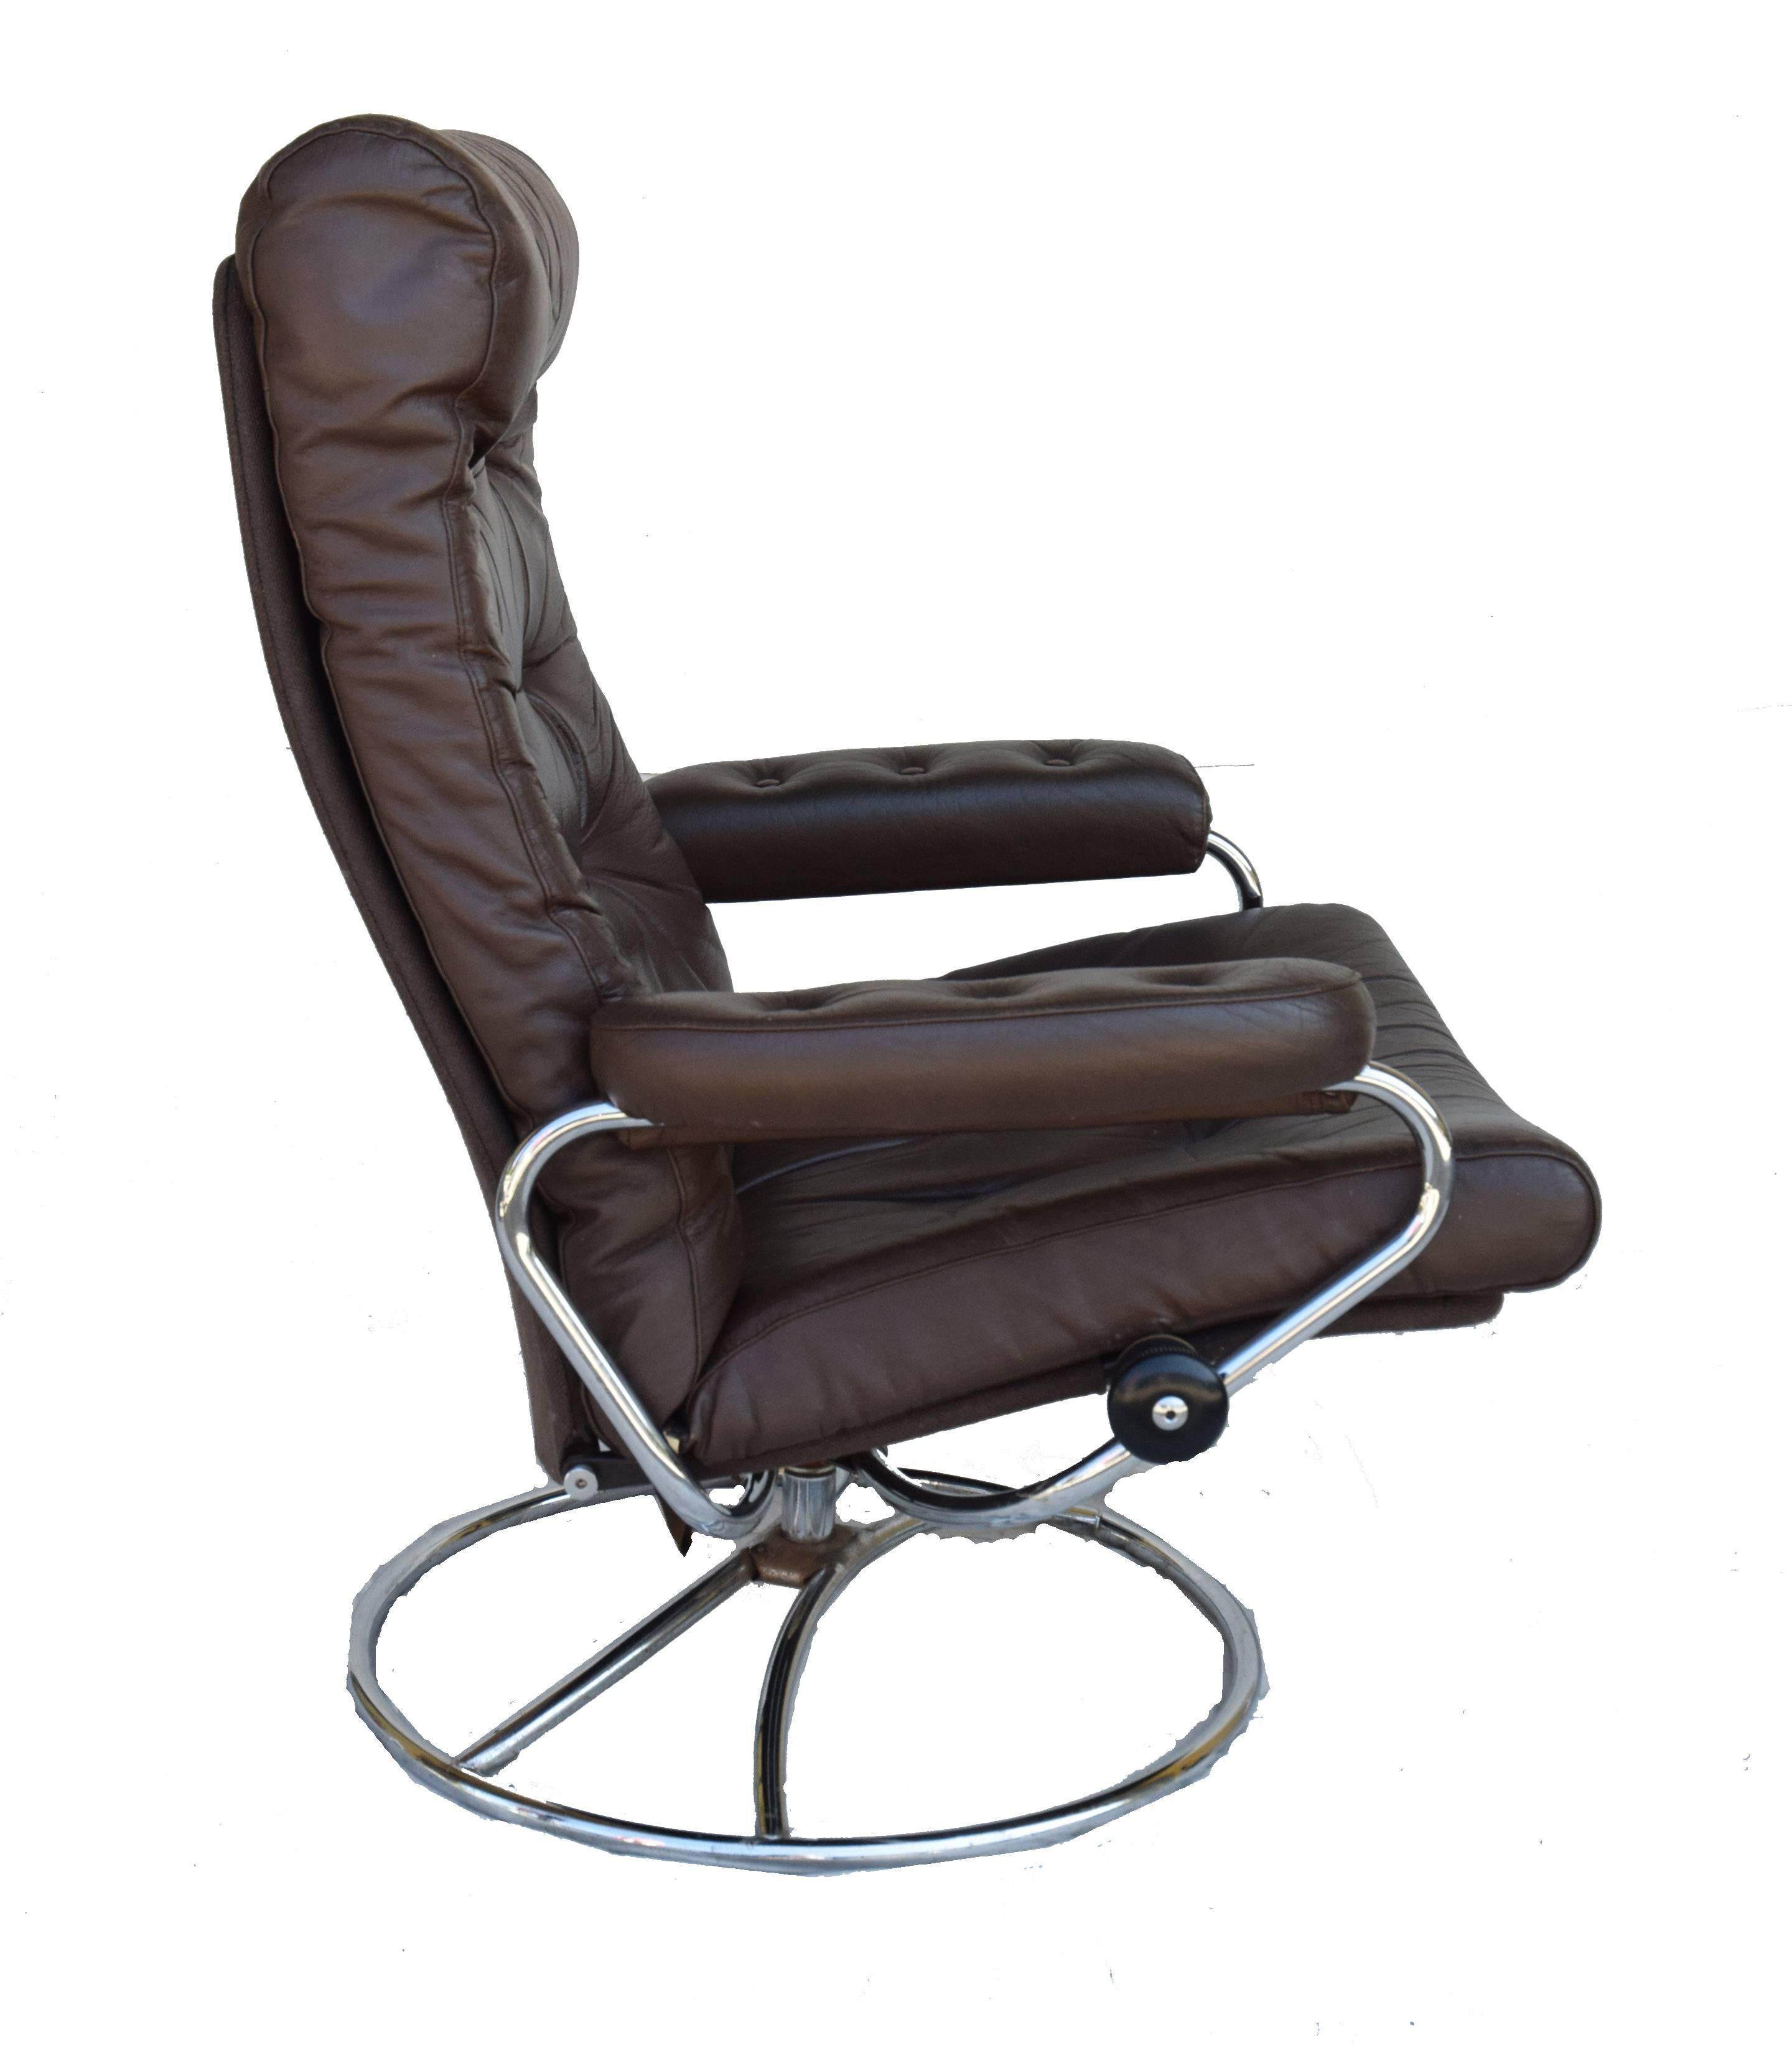 stressless chair prices